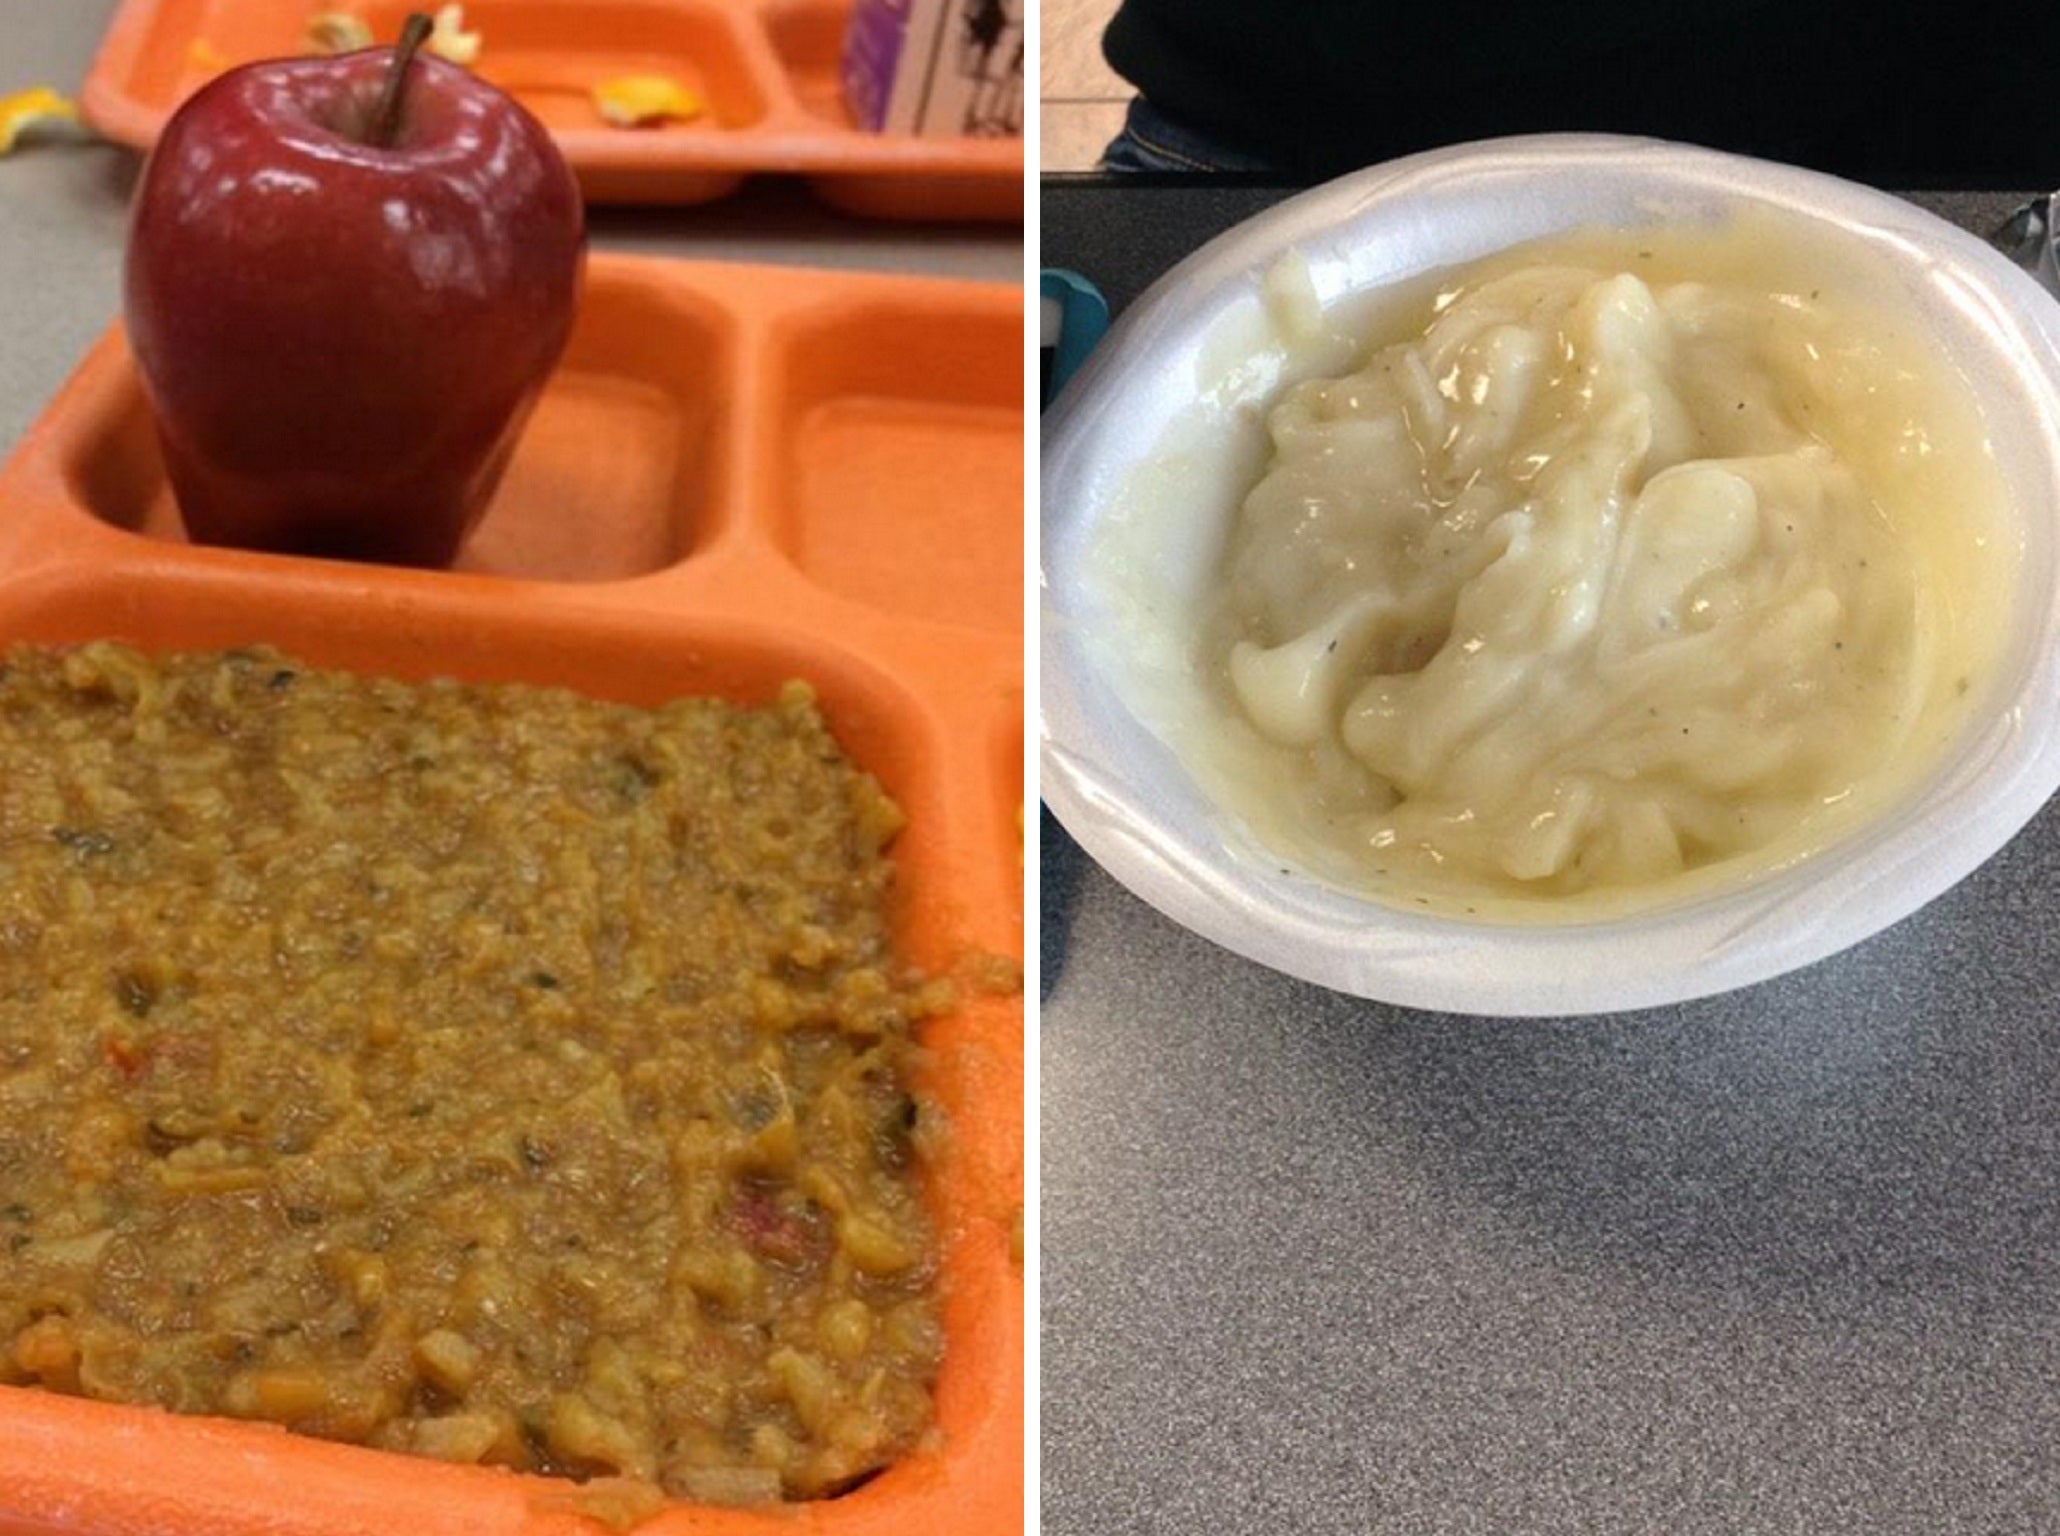 Students of different schools posted photos under the hashtag #thanksMichelleObama